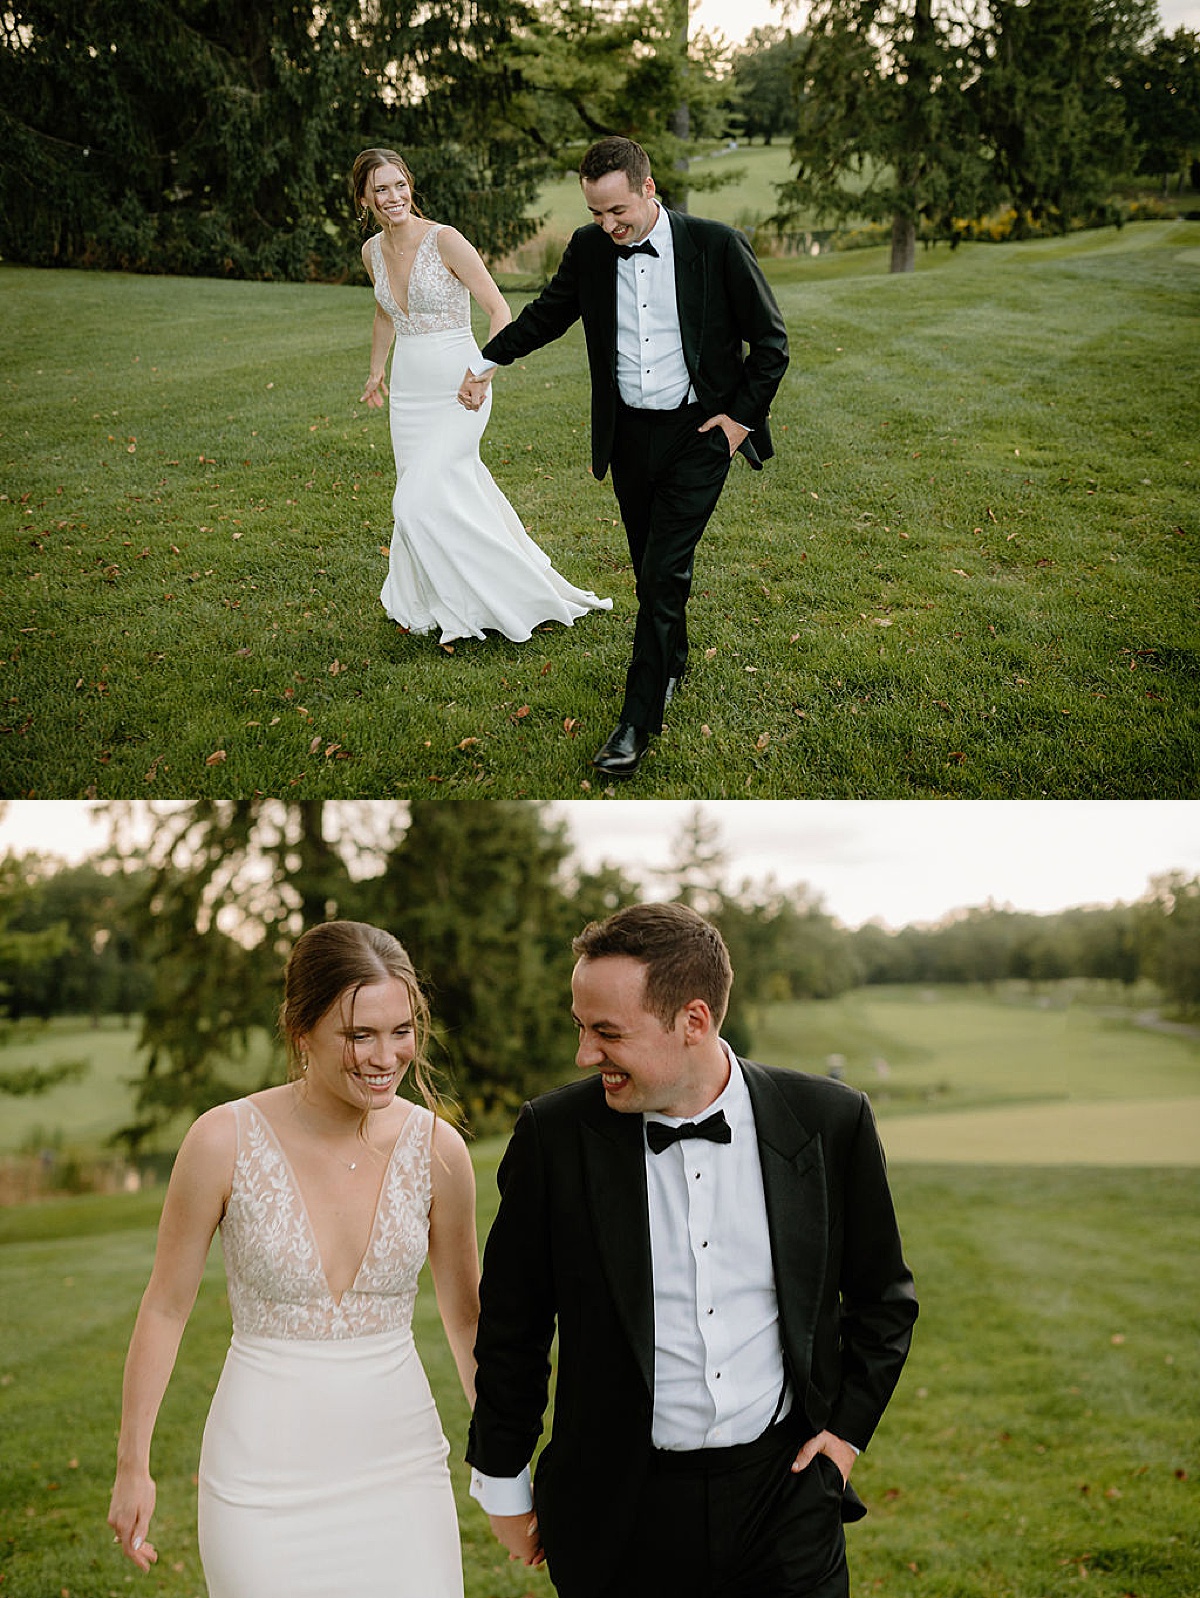 bride and groom wander country club lawn after heartfelt ceremony shot by Indigo Lace Collective